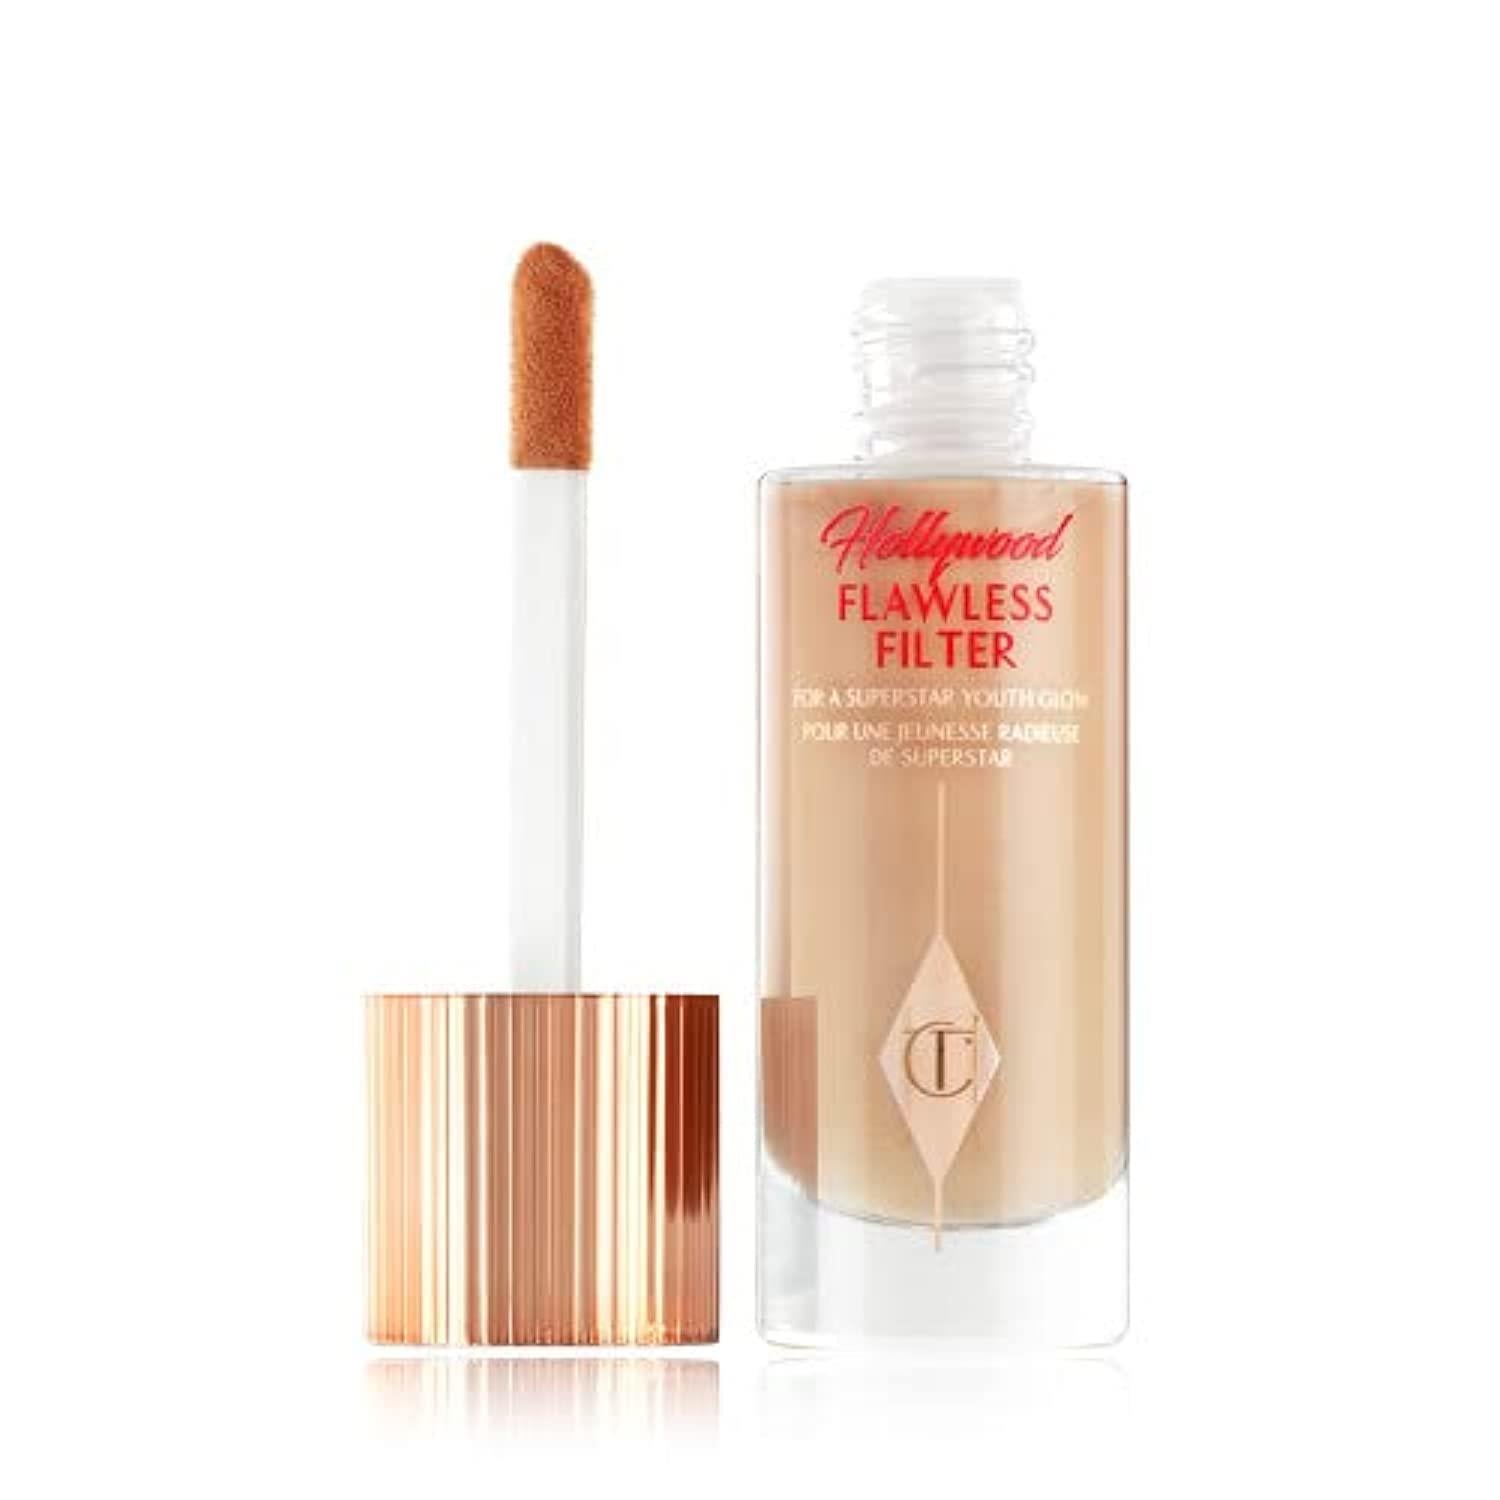 Charlotte Tilbury Hollywood Flawless Filter for a Superstar Youth Glow Foundation - Hollywood Filter Shade 4 Medium